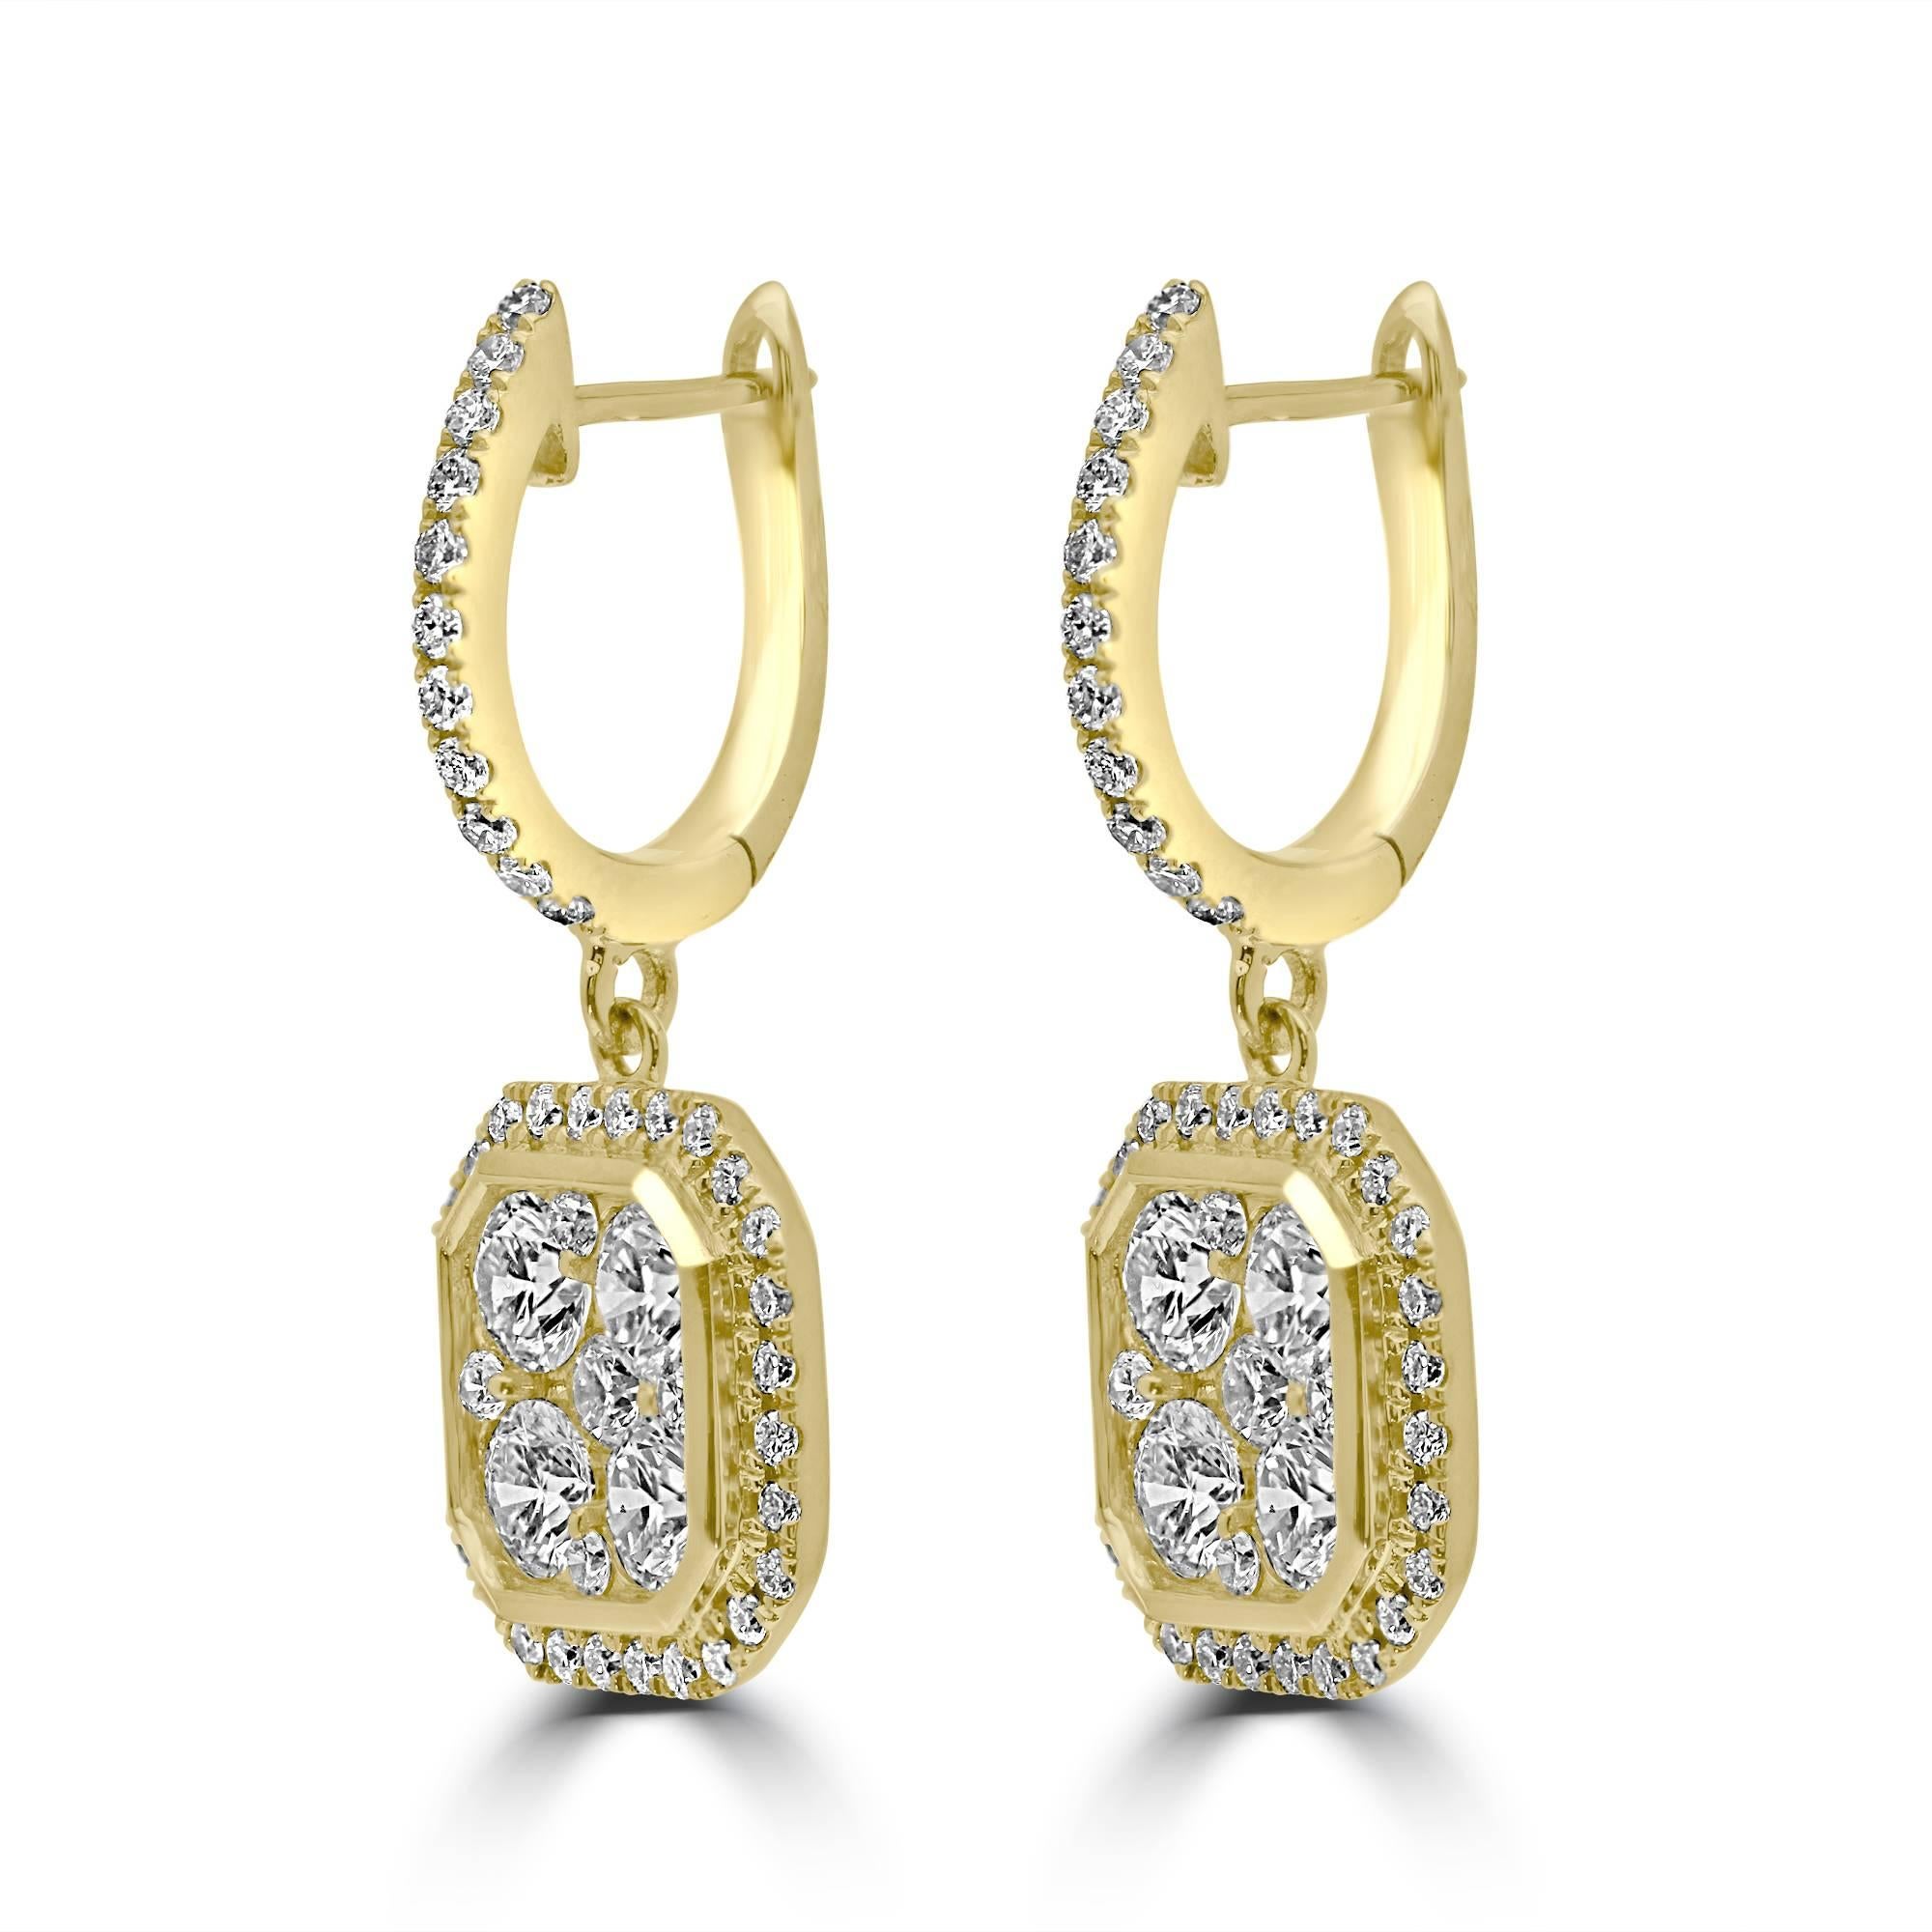 A classic cluster octagonal dangling diamond earrings.
1.50ct round brilliant cut diamonds mounted in 18kt yellow gold.
Matching pendant is available.
Contact us for more information.